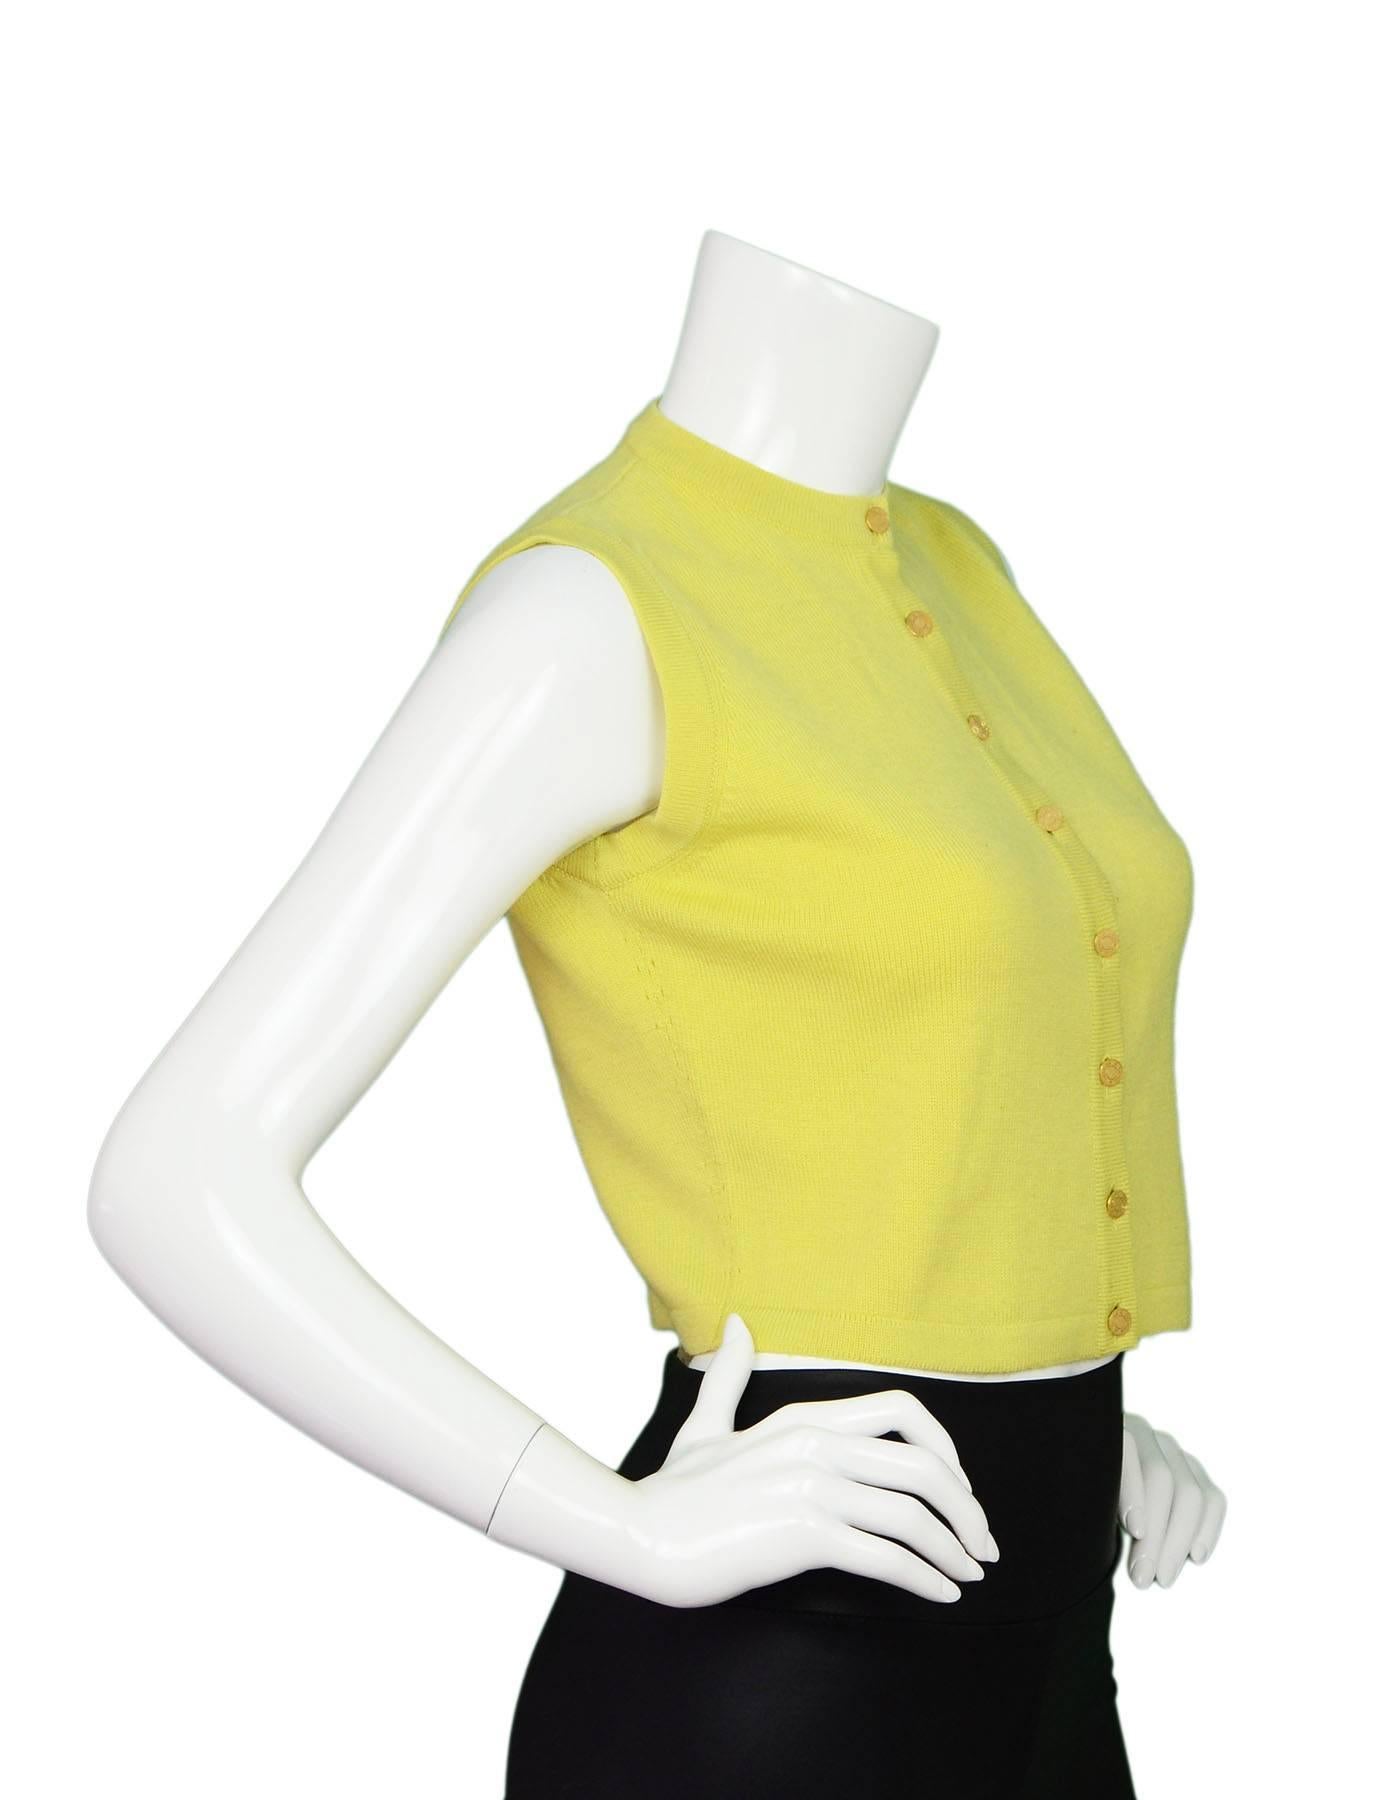 Hermes Yellow Chartruse Sleeveless Sweater Sz M

Color: Yellow
Composition: Not listed, feels like cashmere
Lining: None
Closure/Opening: Front button closure
Overall Condition: Very good pre-owned condition with the exception of slight pilling